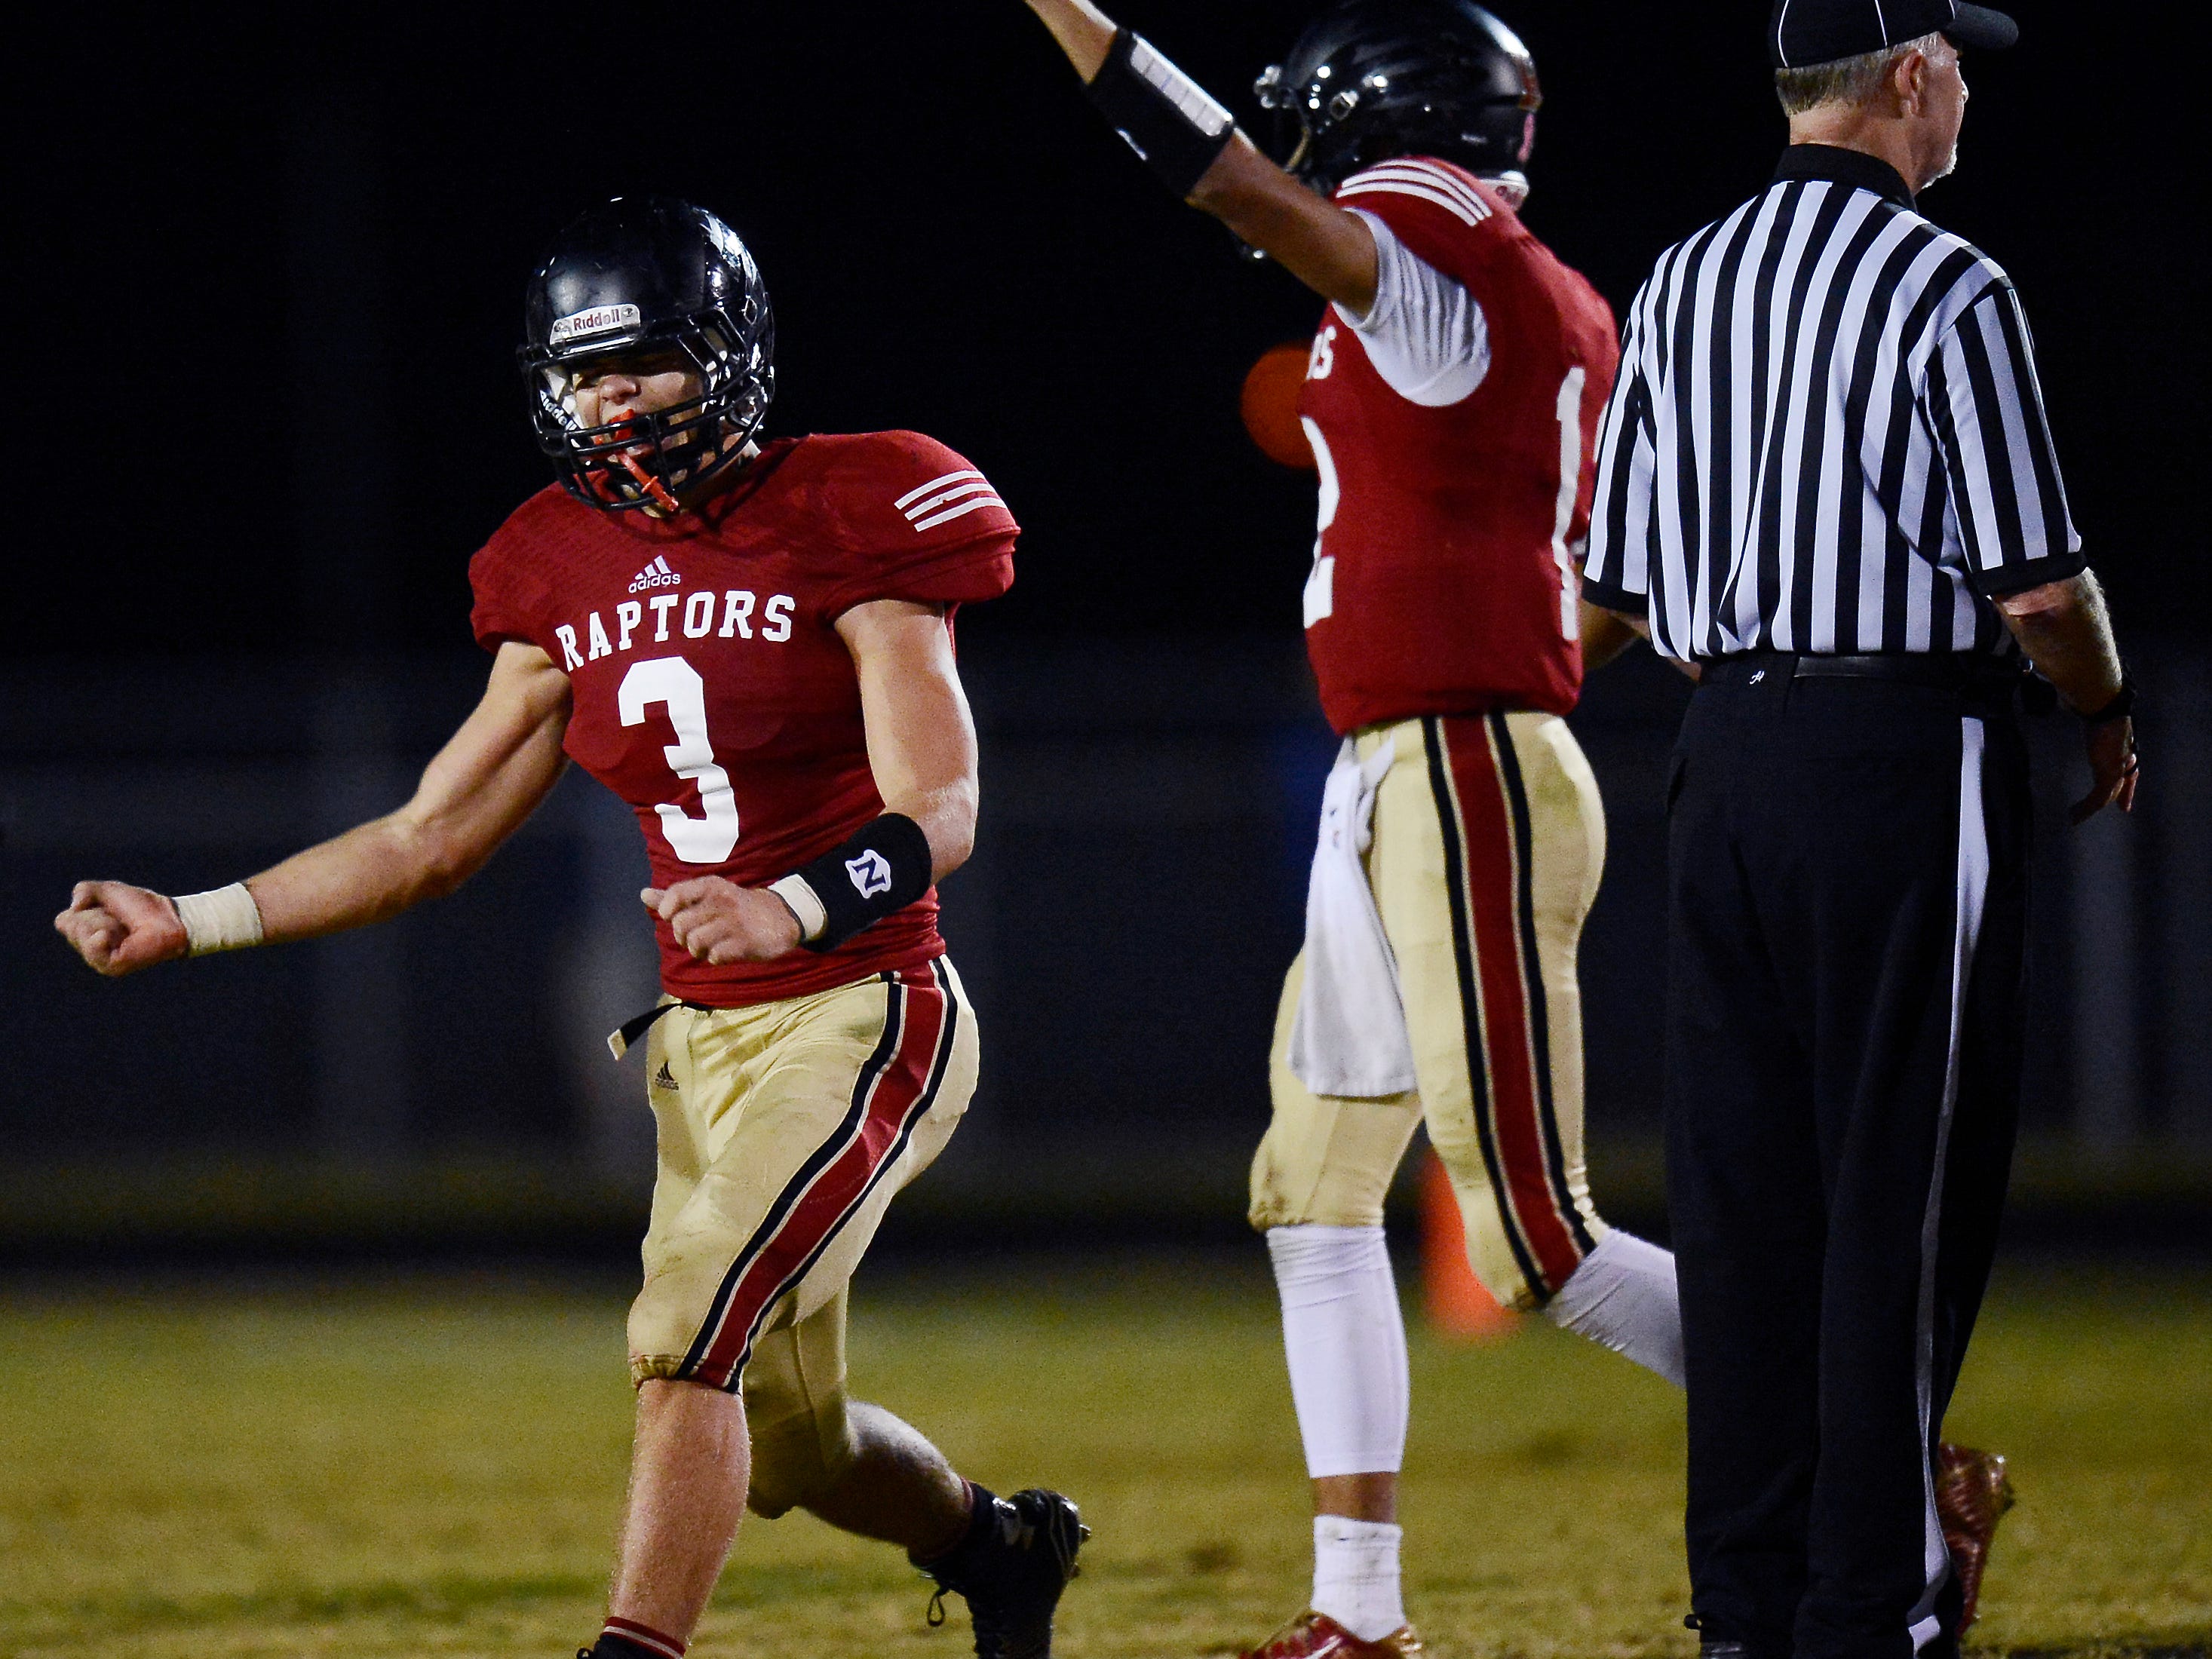 Ravenwood wide receiver Austin Burt (3) and quarterback Cole Brown (12) celebrate after beating Centennial 24-0 two weeks ago.